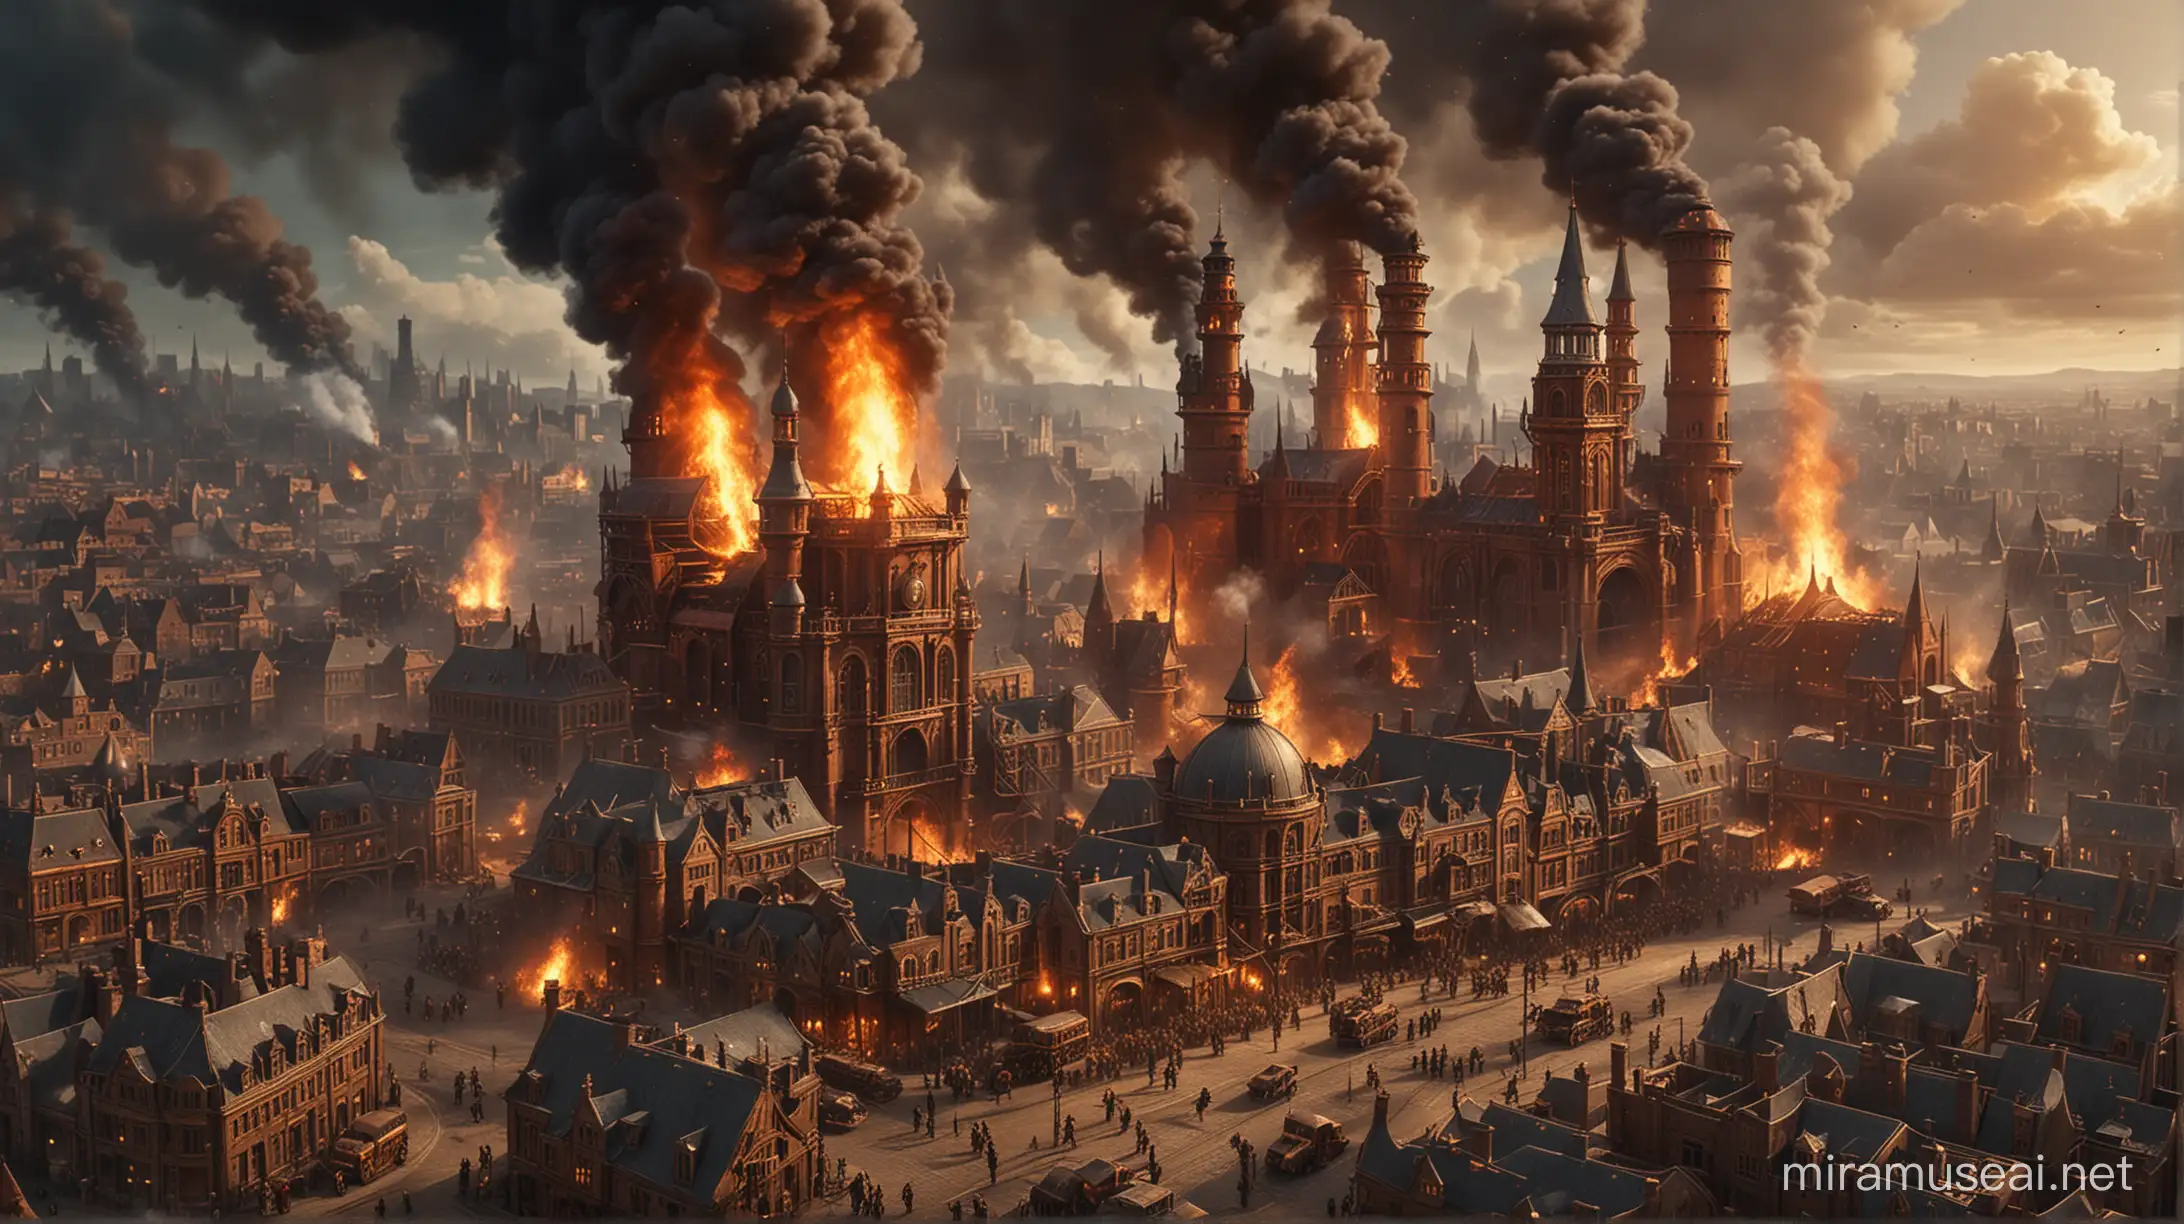 great fire in a steampunk city built of copper and gold. many fire brigades. much steamp and smoke. it gets dark.